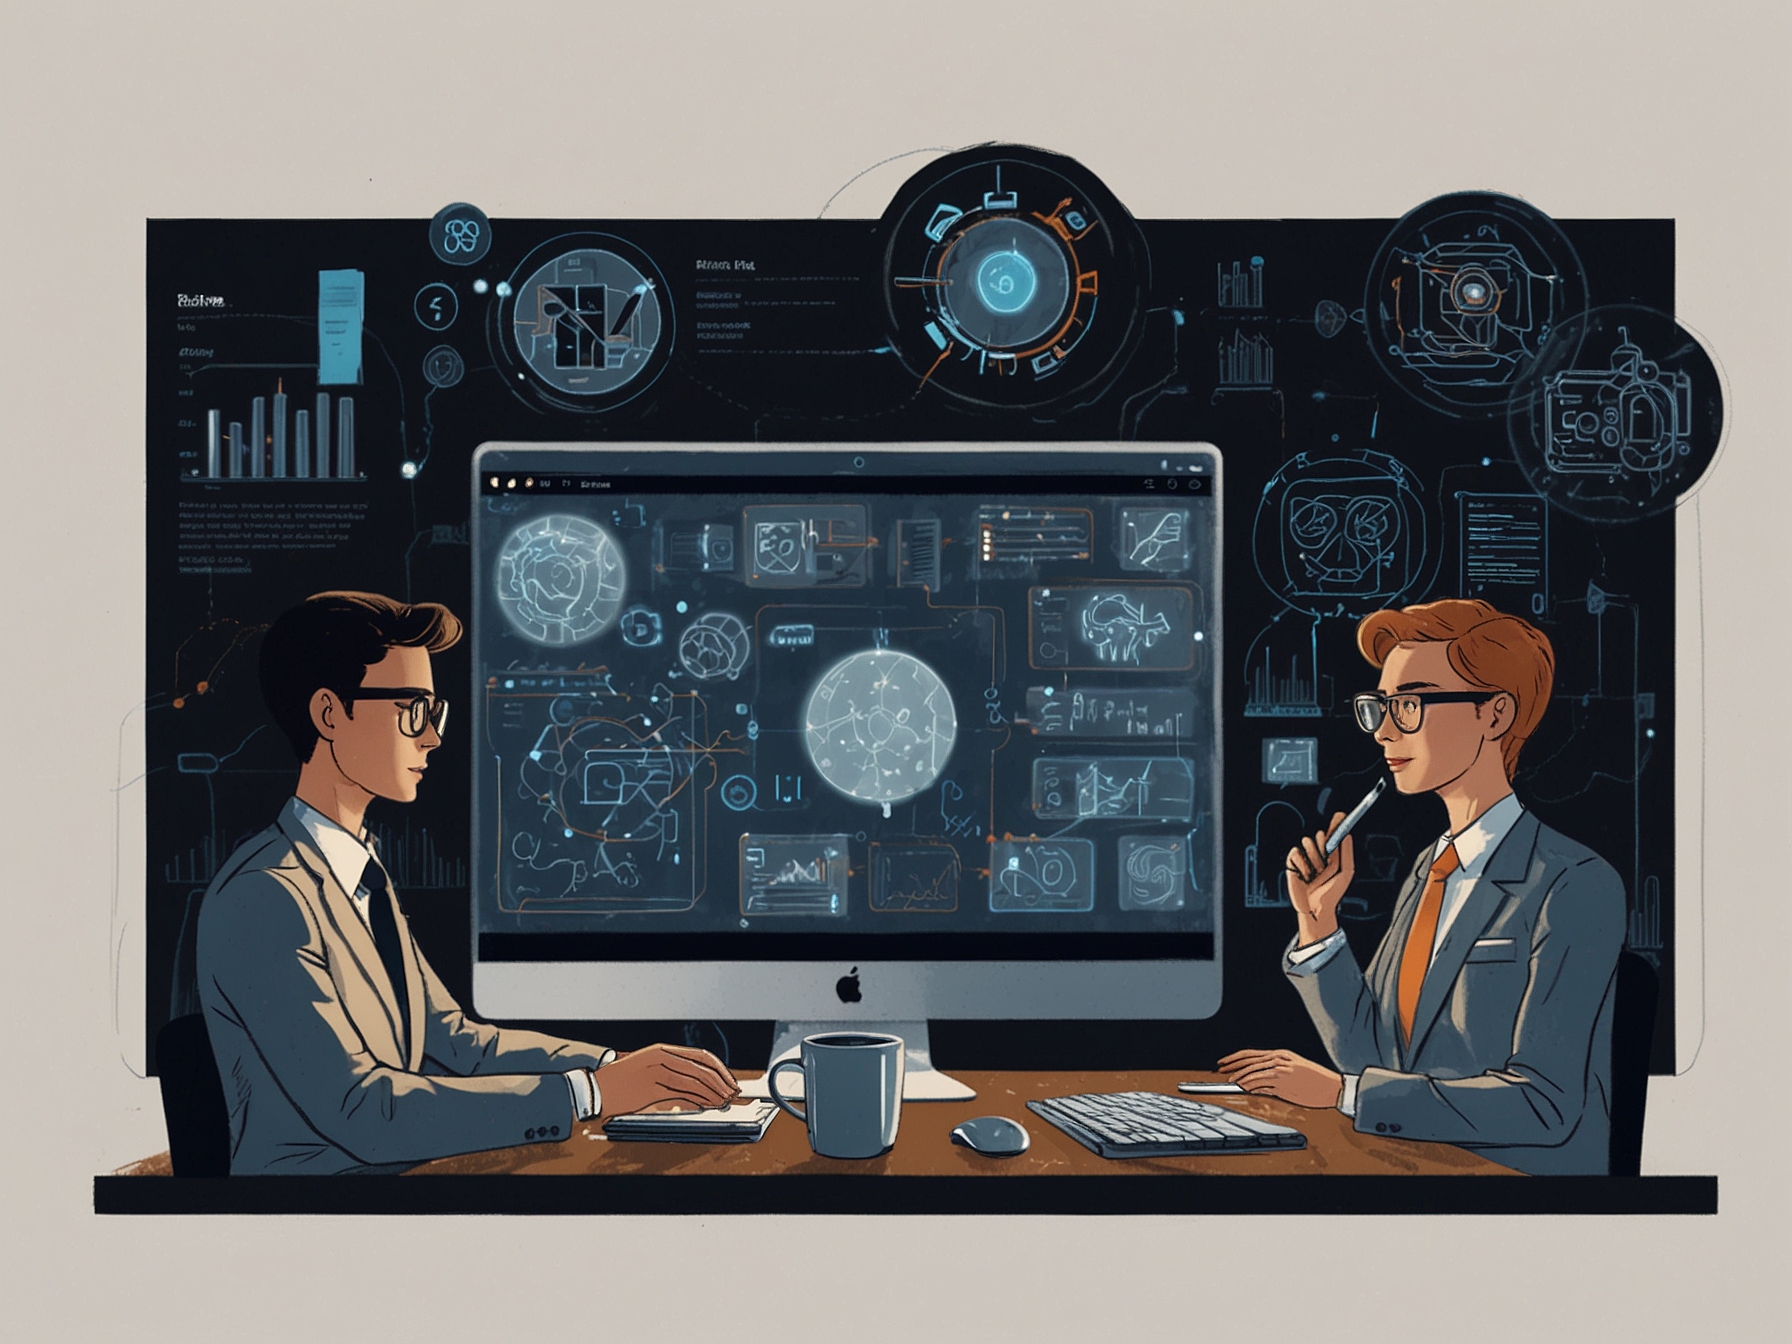 A visual of a business professional using various AI tools on different screens to draft content, create illustrations, translate languages, and produce videos, representing enhanced productivity.